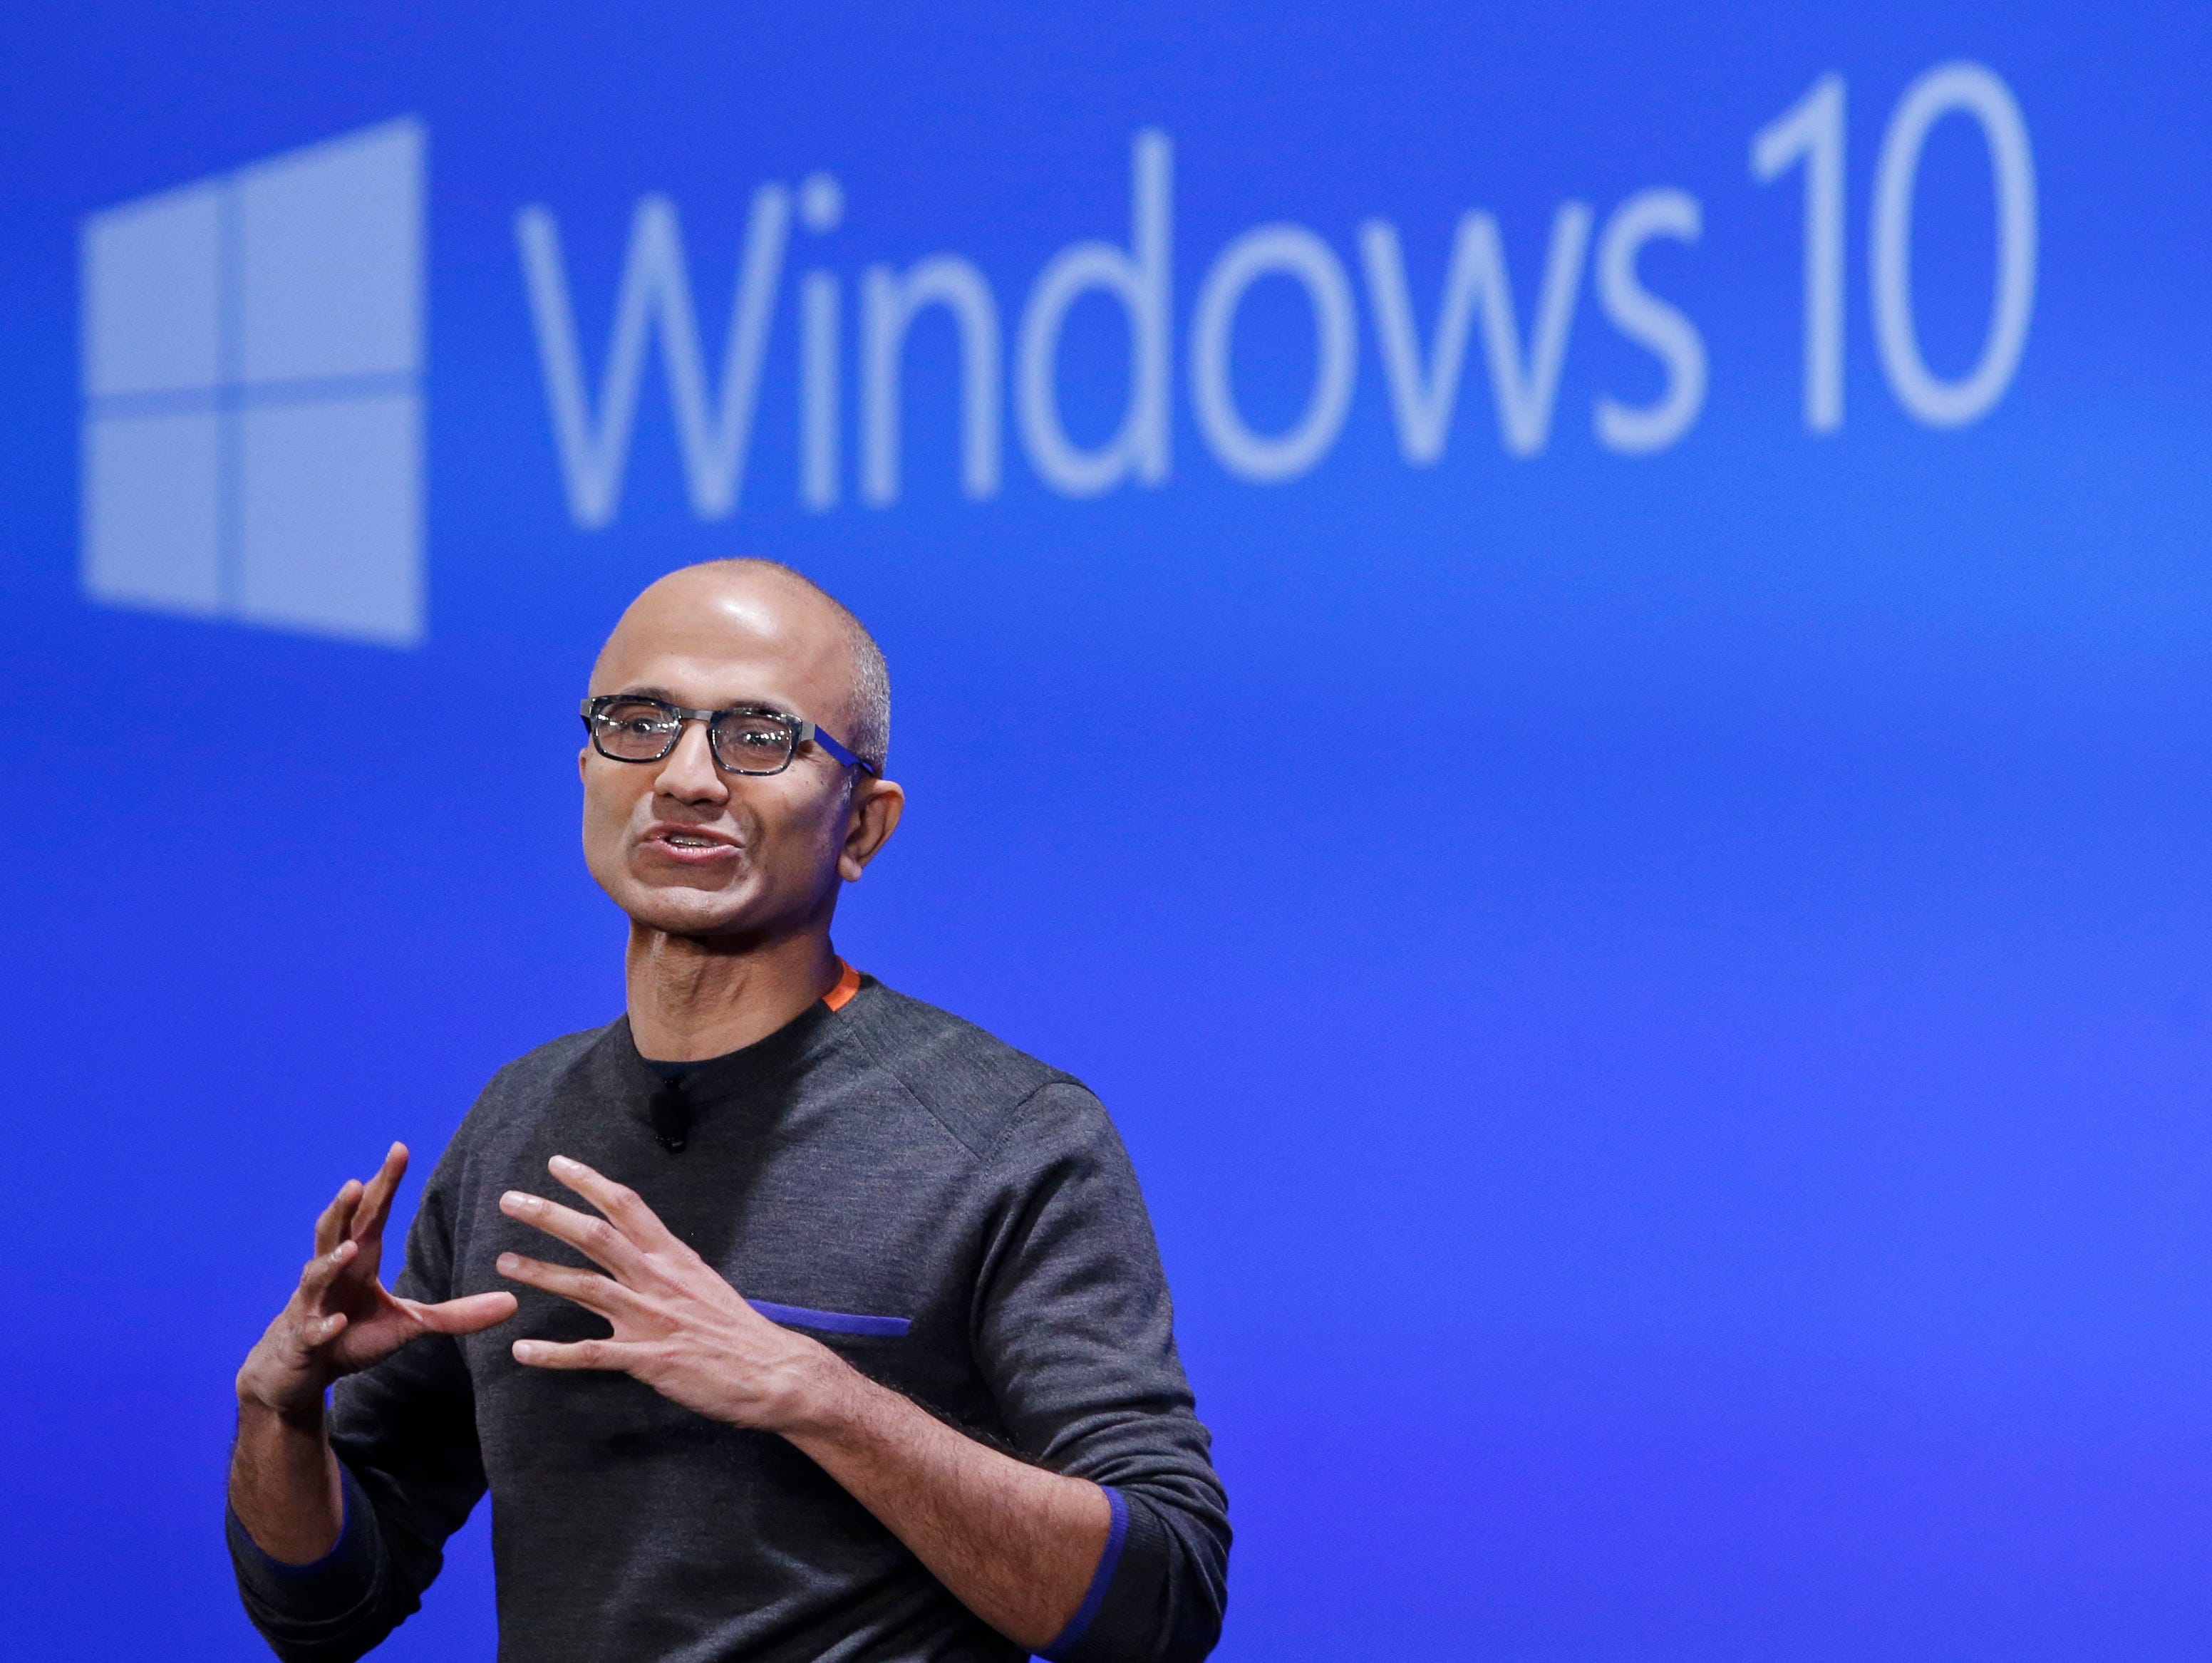 FILE - In this Jan. 21, 2015 file photo, Microsoft CEO Satya Nadella speaks at an event demonstrating the new features of Windows 10 at the company's headquarters in Redmond, Wash. Microsoft reports quarterly financial results on Monday, Jan. 26, 201